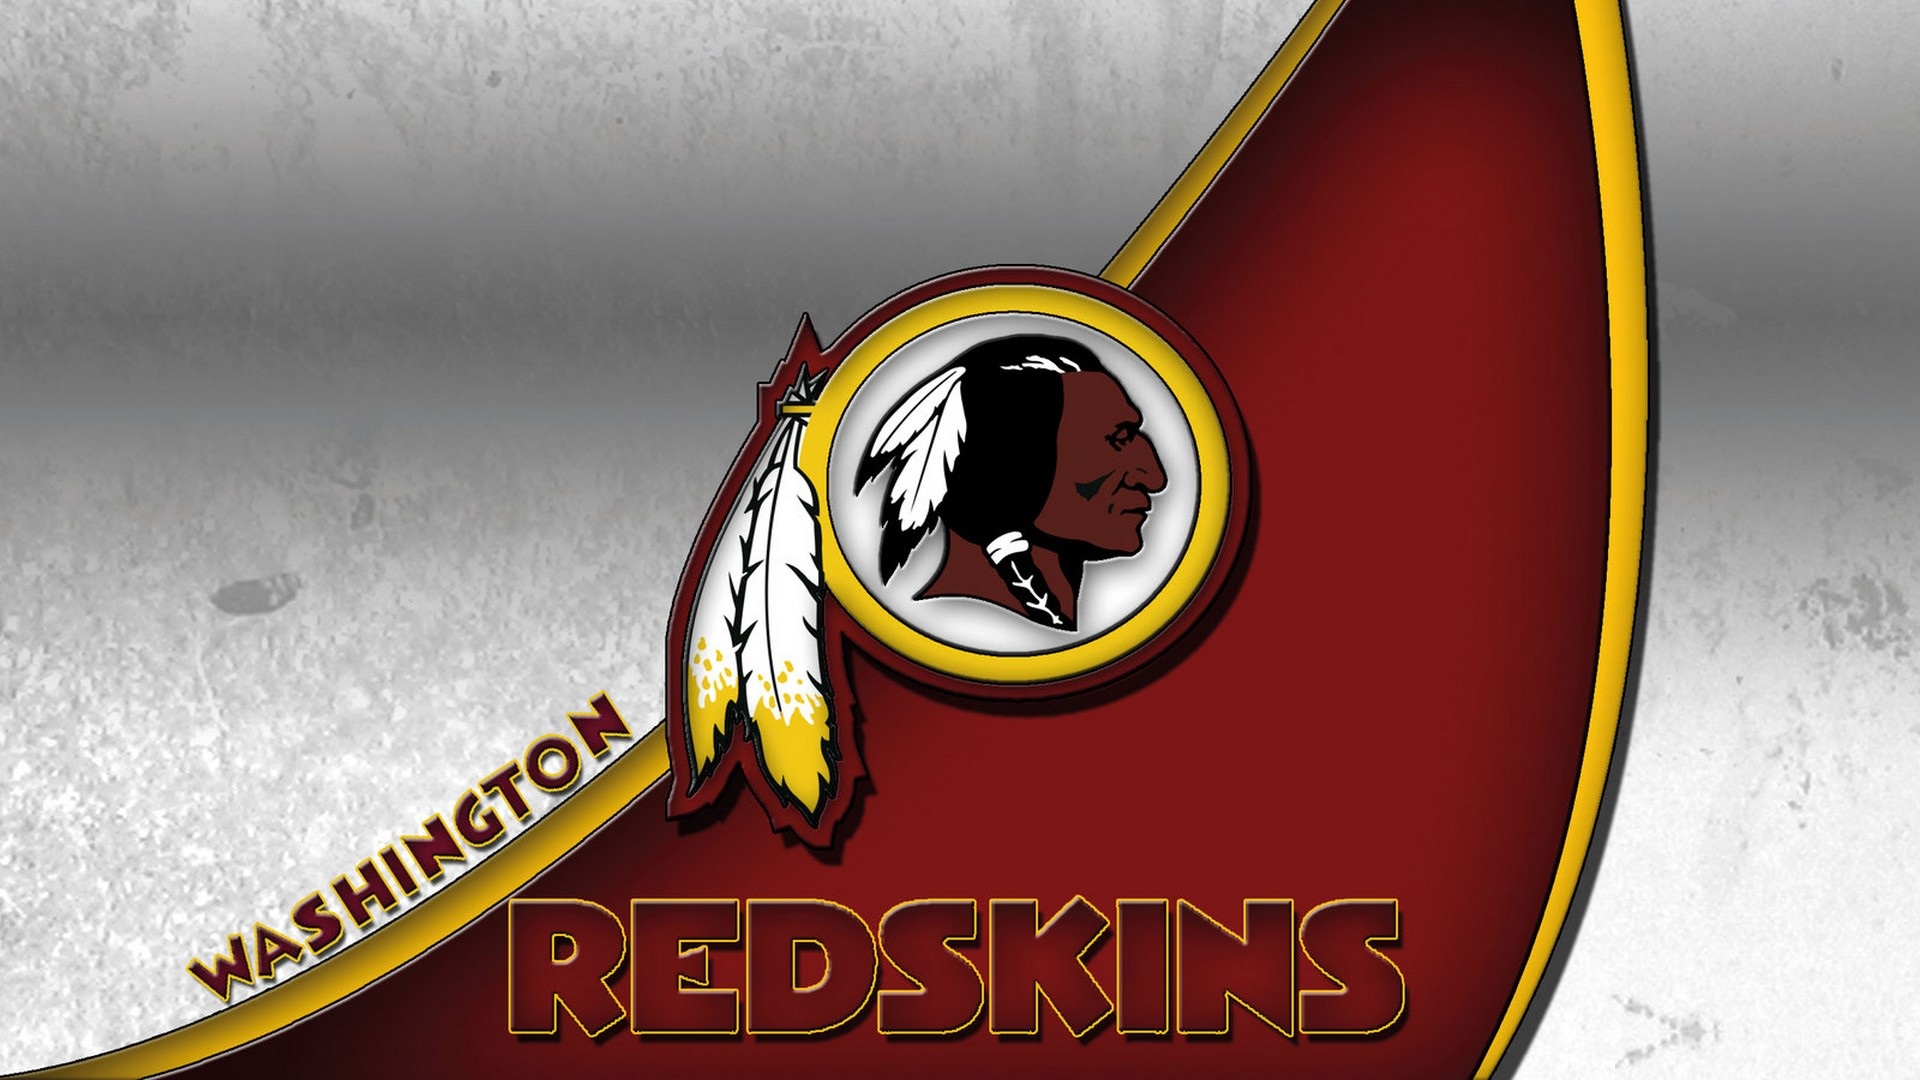 Washington Redskins Backgrounds HD with high-resolution 1920x1080 pixel. You can use this wallpaper for your Mac or Windows Desktop Background, iPhone, Android or Tablet and another Smartphone device